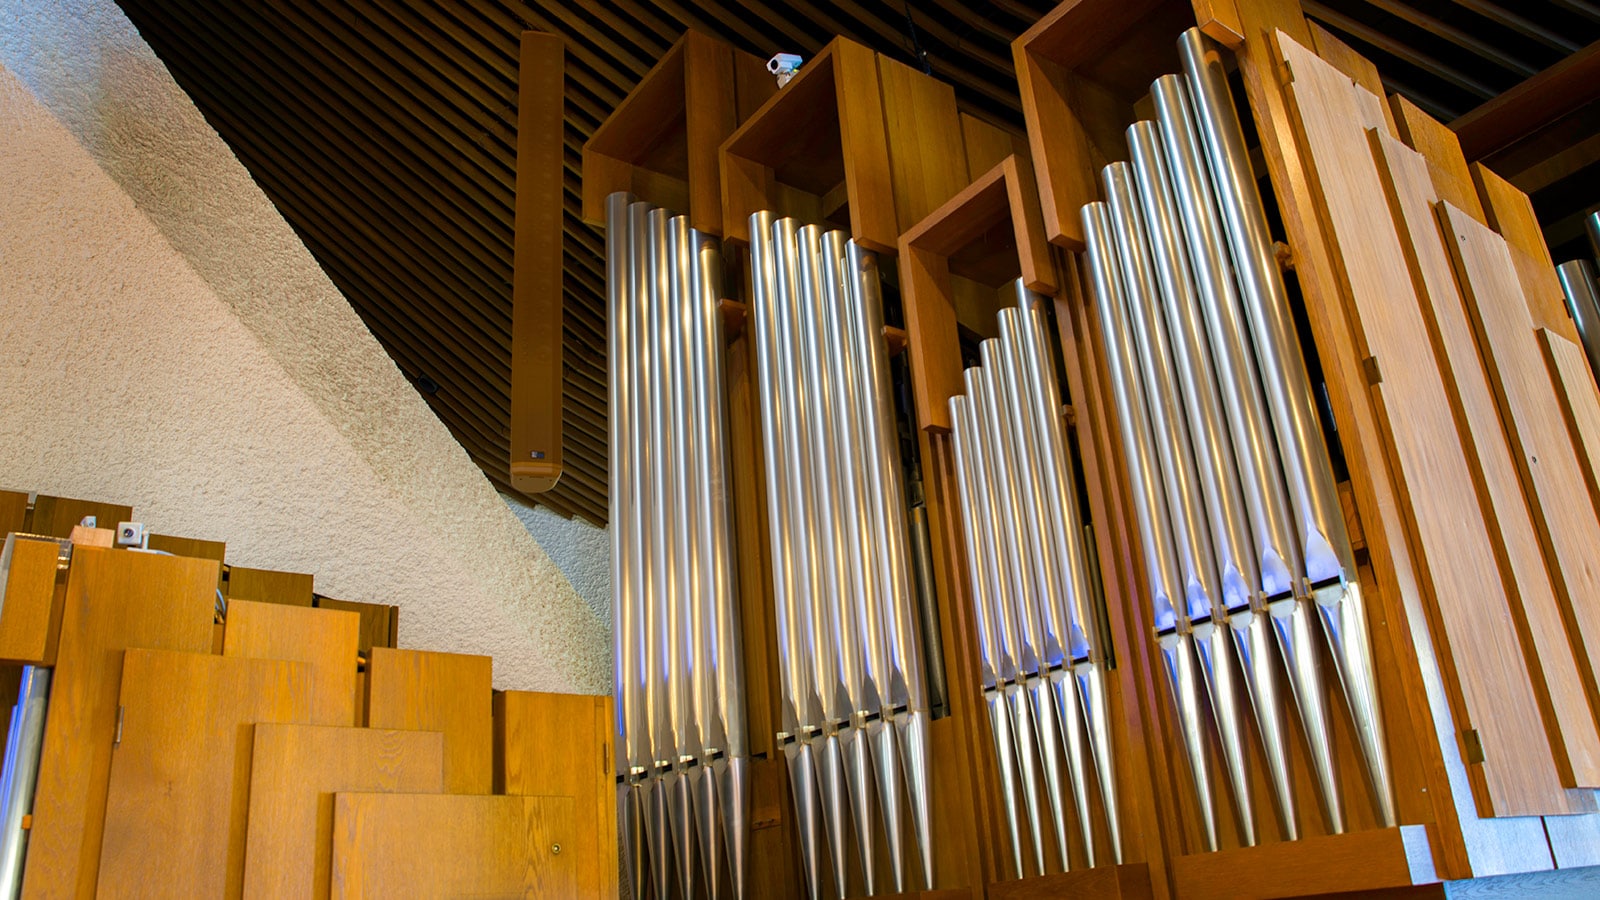 Meyer Sound CAL Loudspeakers Enhance Intelligibility and Aesthetics at Swiss Church